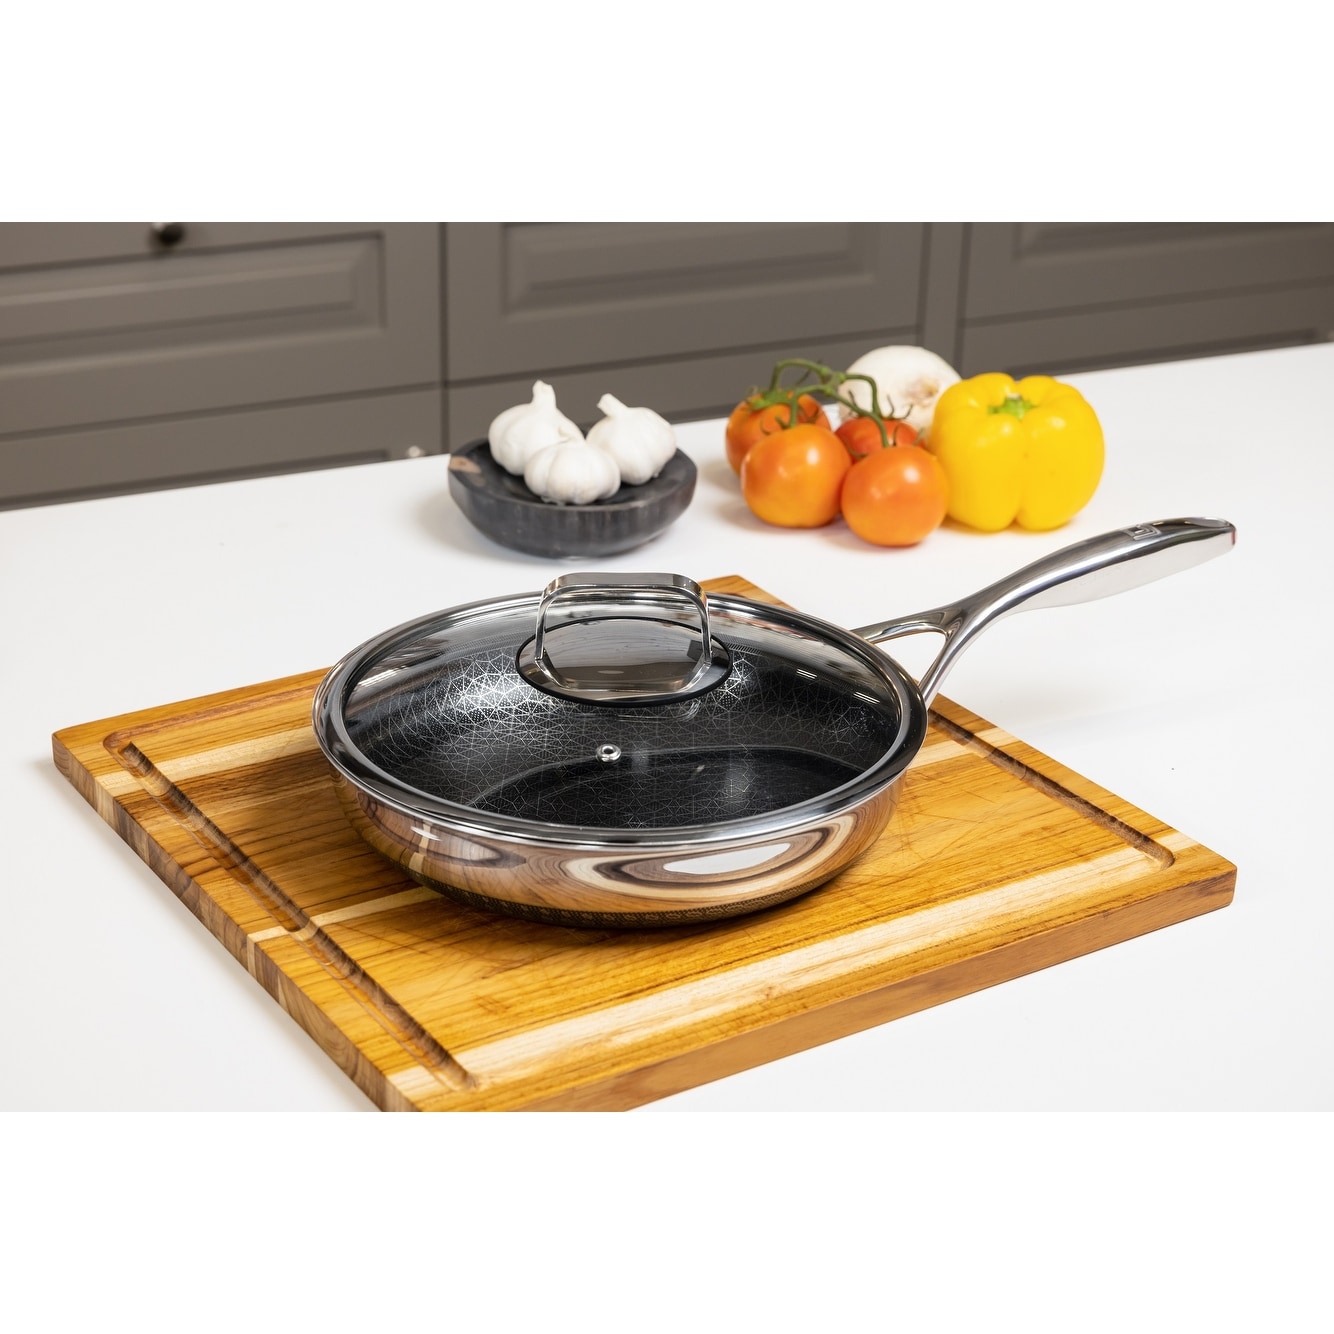 https://ak1.ostkcdn.com/images/products/is/images/direct/6fa735ab2debc053fa0d78060f54e806a9412d61/DiamondClad-by-Livwell-Hybrid-Nonstick-Frying-Pan-Set-with-Tempered-Glass-Lid%2C-Dishwasher-Safe%2C-Cool-Touch-Handle%2C-PFOA-free.jpg